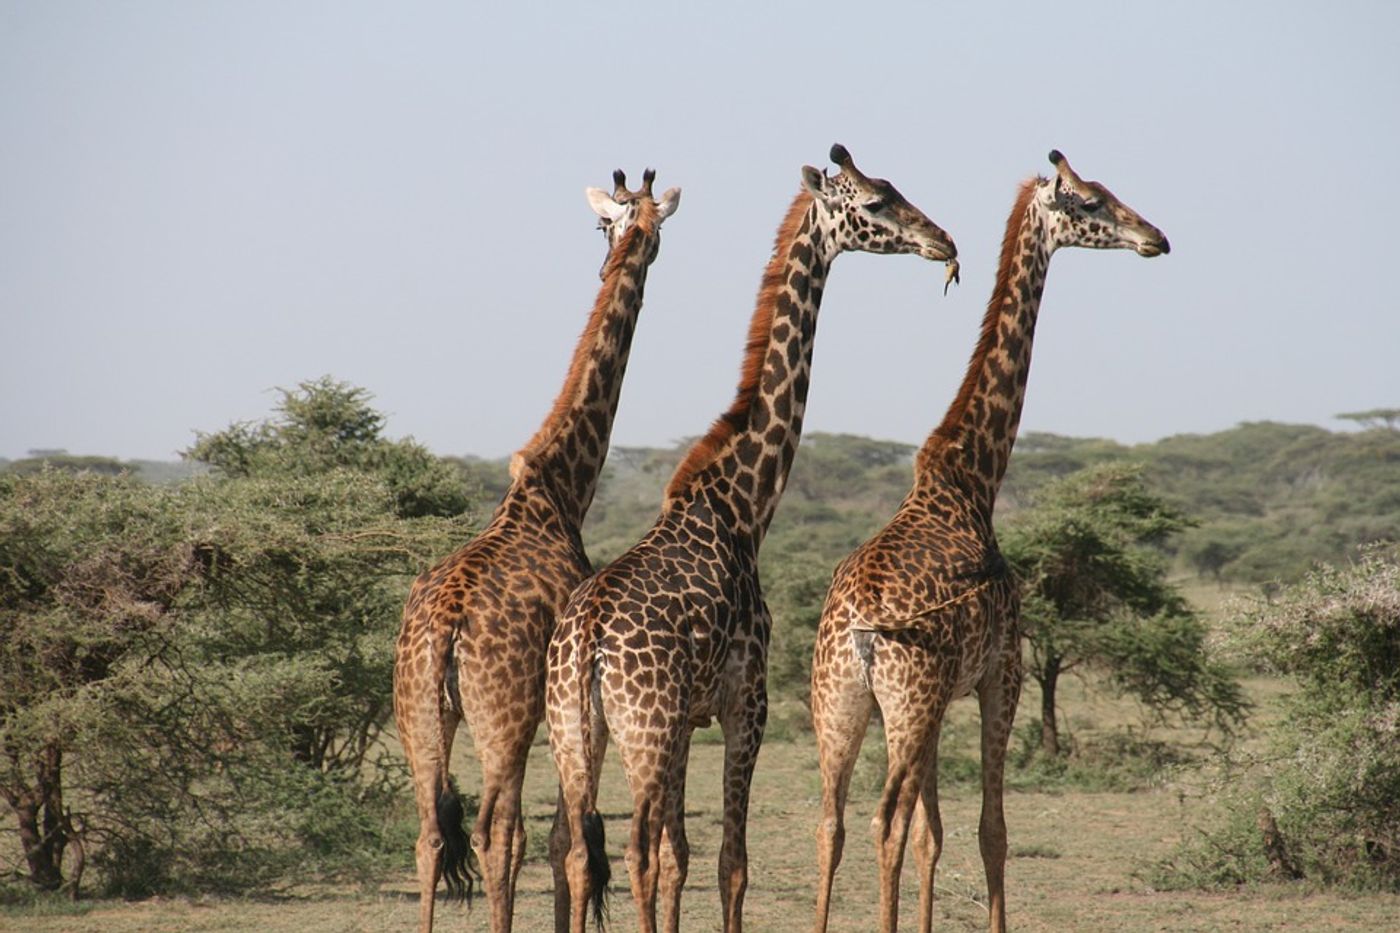 Giraffes in their natural habitat (not at the park).